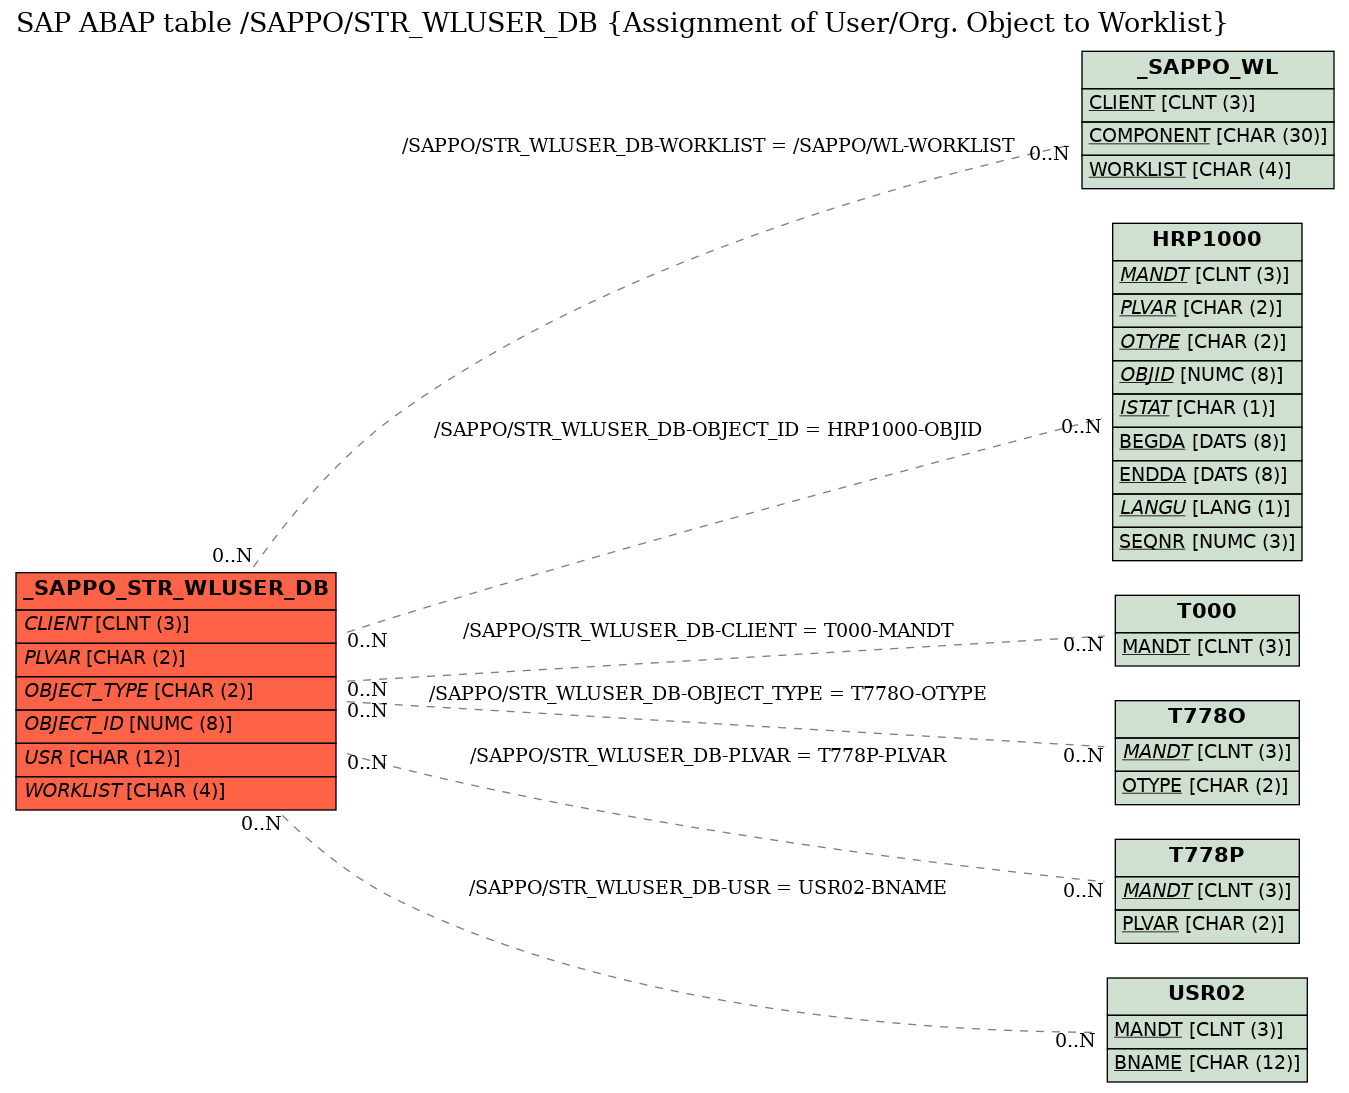 E-R Diagram for table /SAPPO/STR_WLUSER_DB (Assignment of User/Org. Object to Worklist)